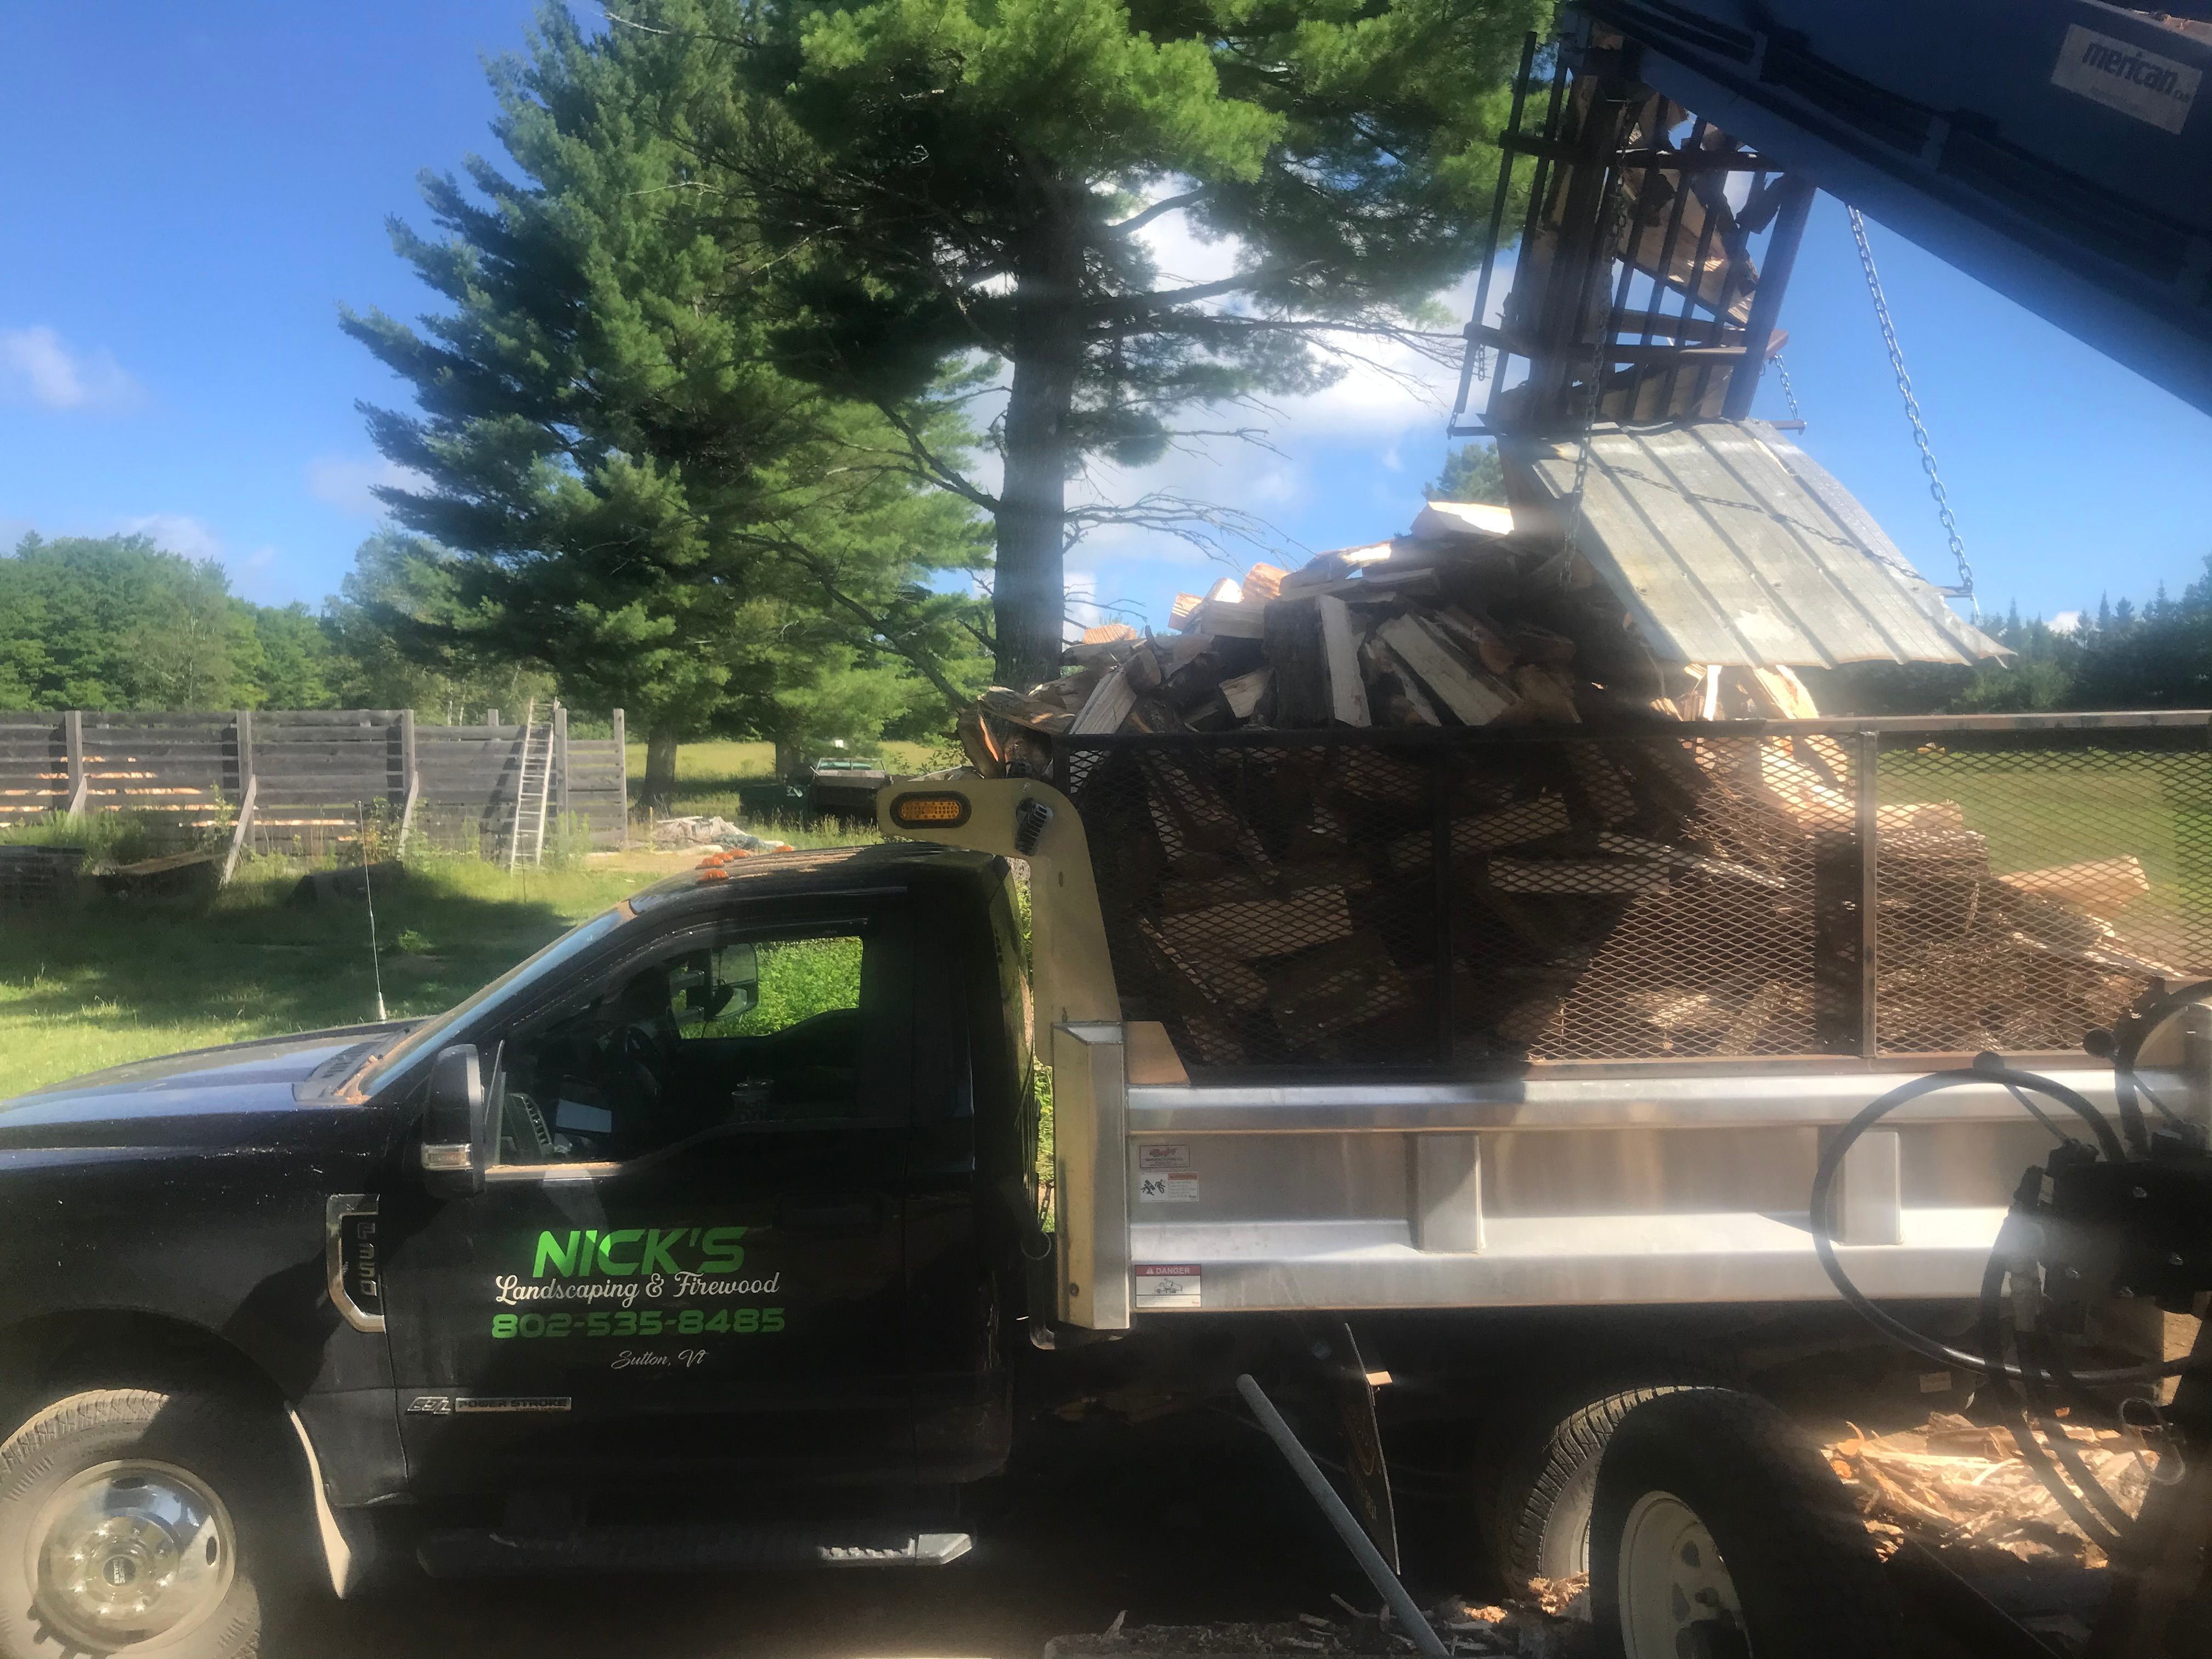  for Nick's Landscaping & Firewood in Sutton , VT